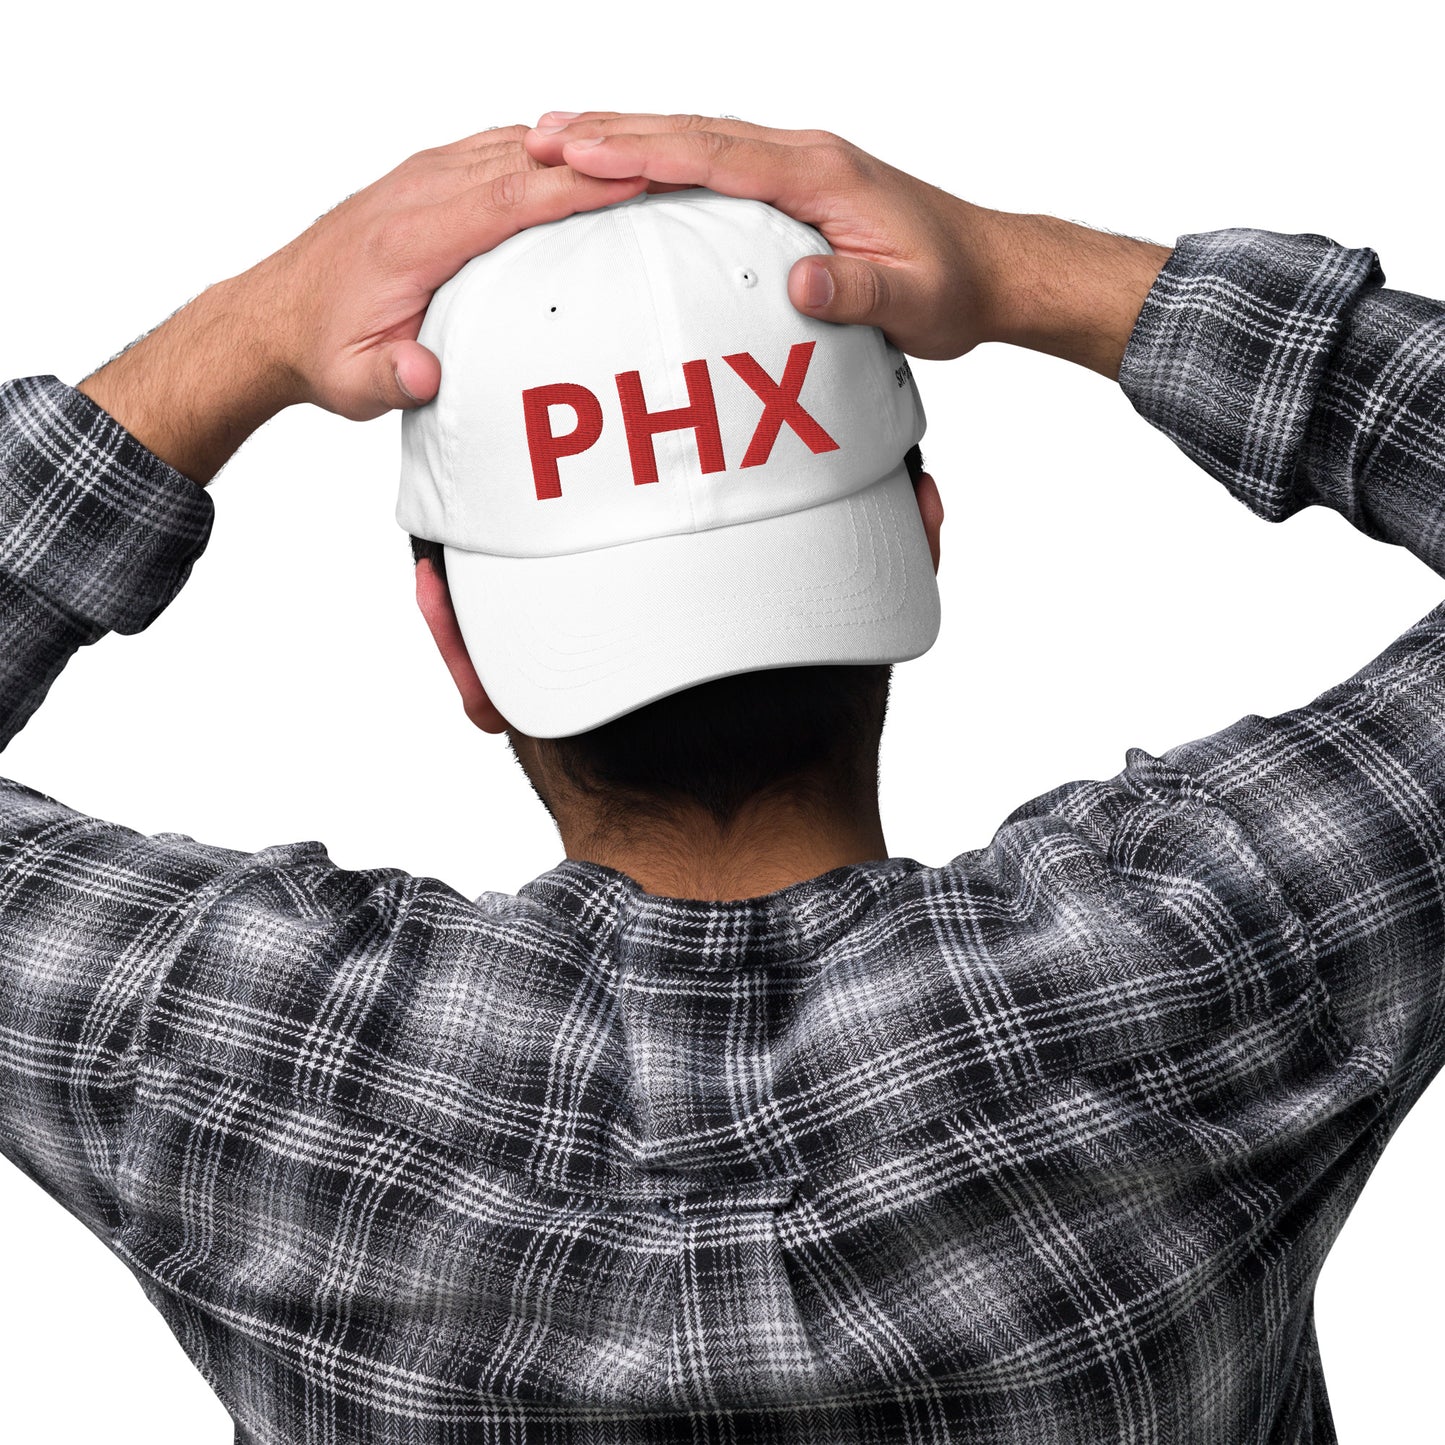 Dad Hat - PHX w/ Sky Ops Live Signature Logo on Left Side in Thunderbird Red